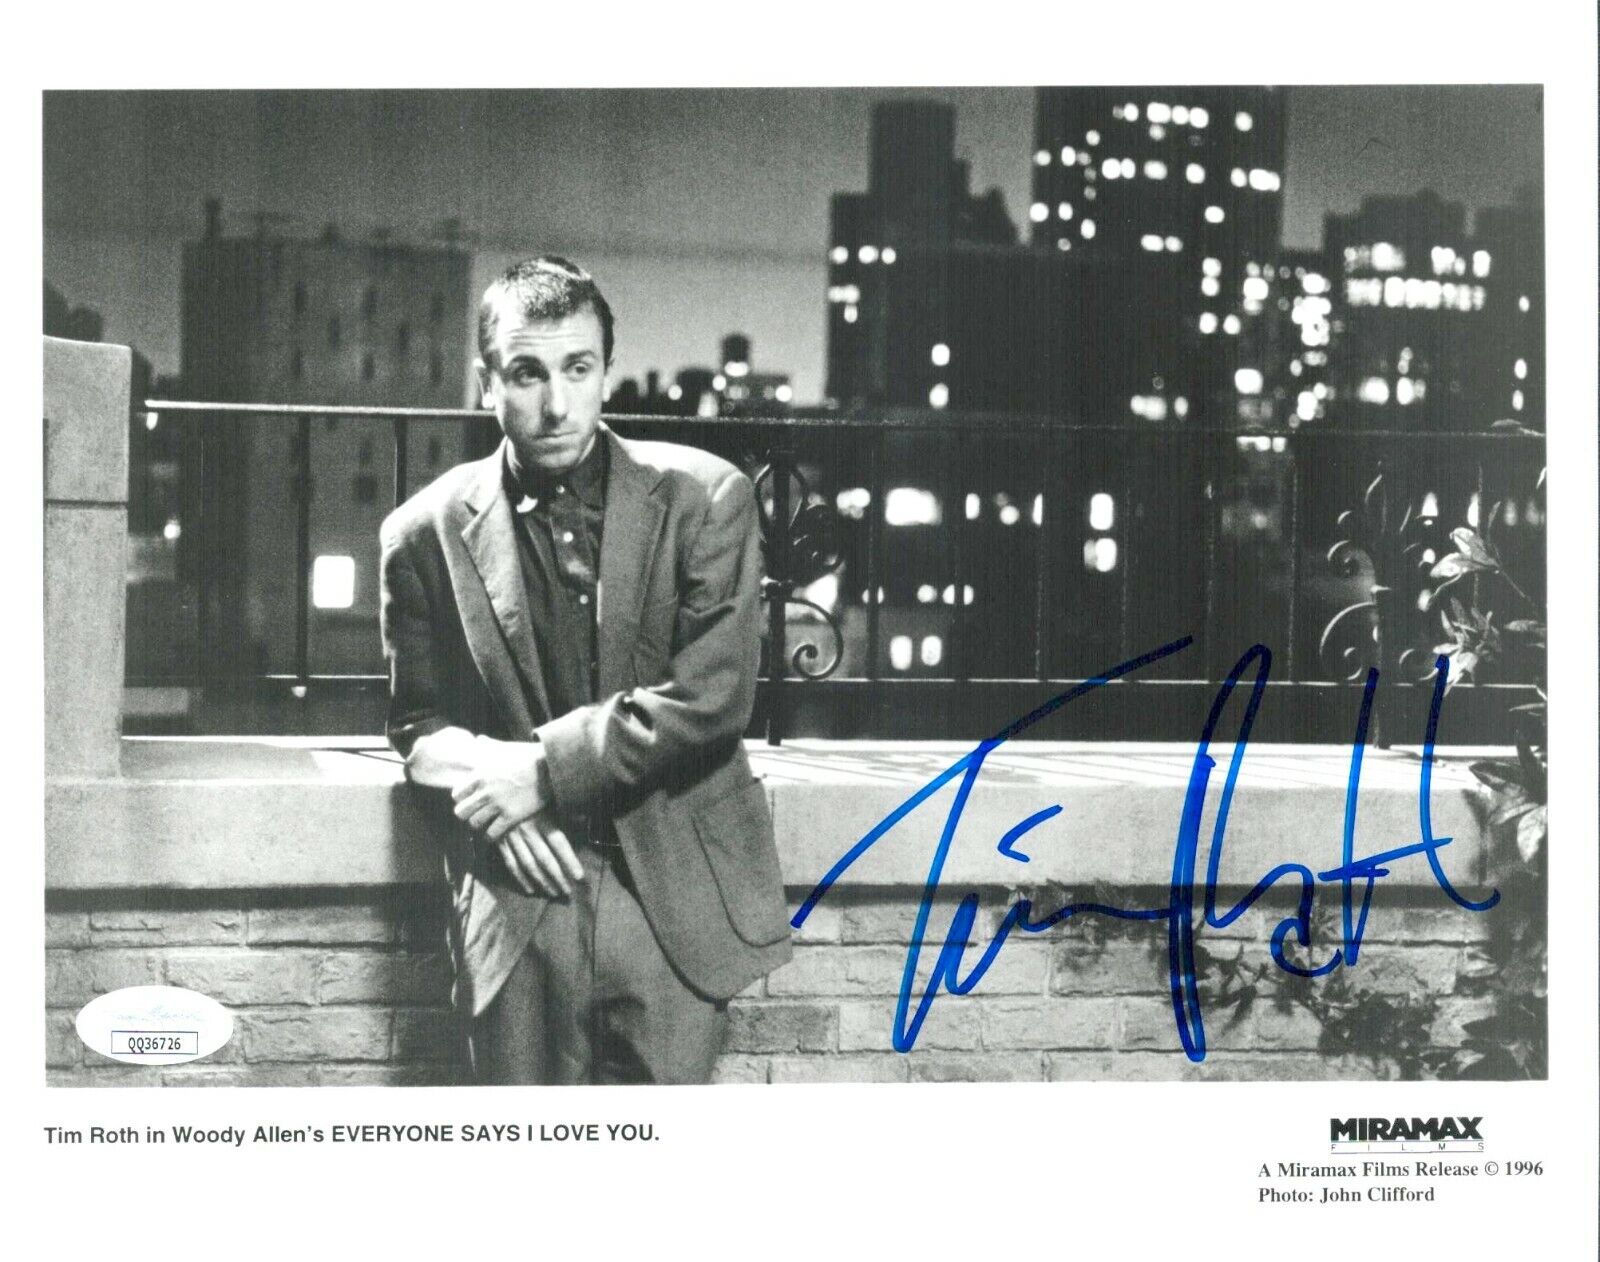 TIM ROTH Signed EVERYONE SAYS I LOVE YOU 8x10 Photo Poster painting with JSA COA